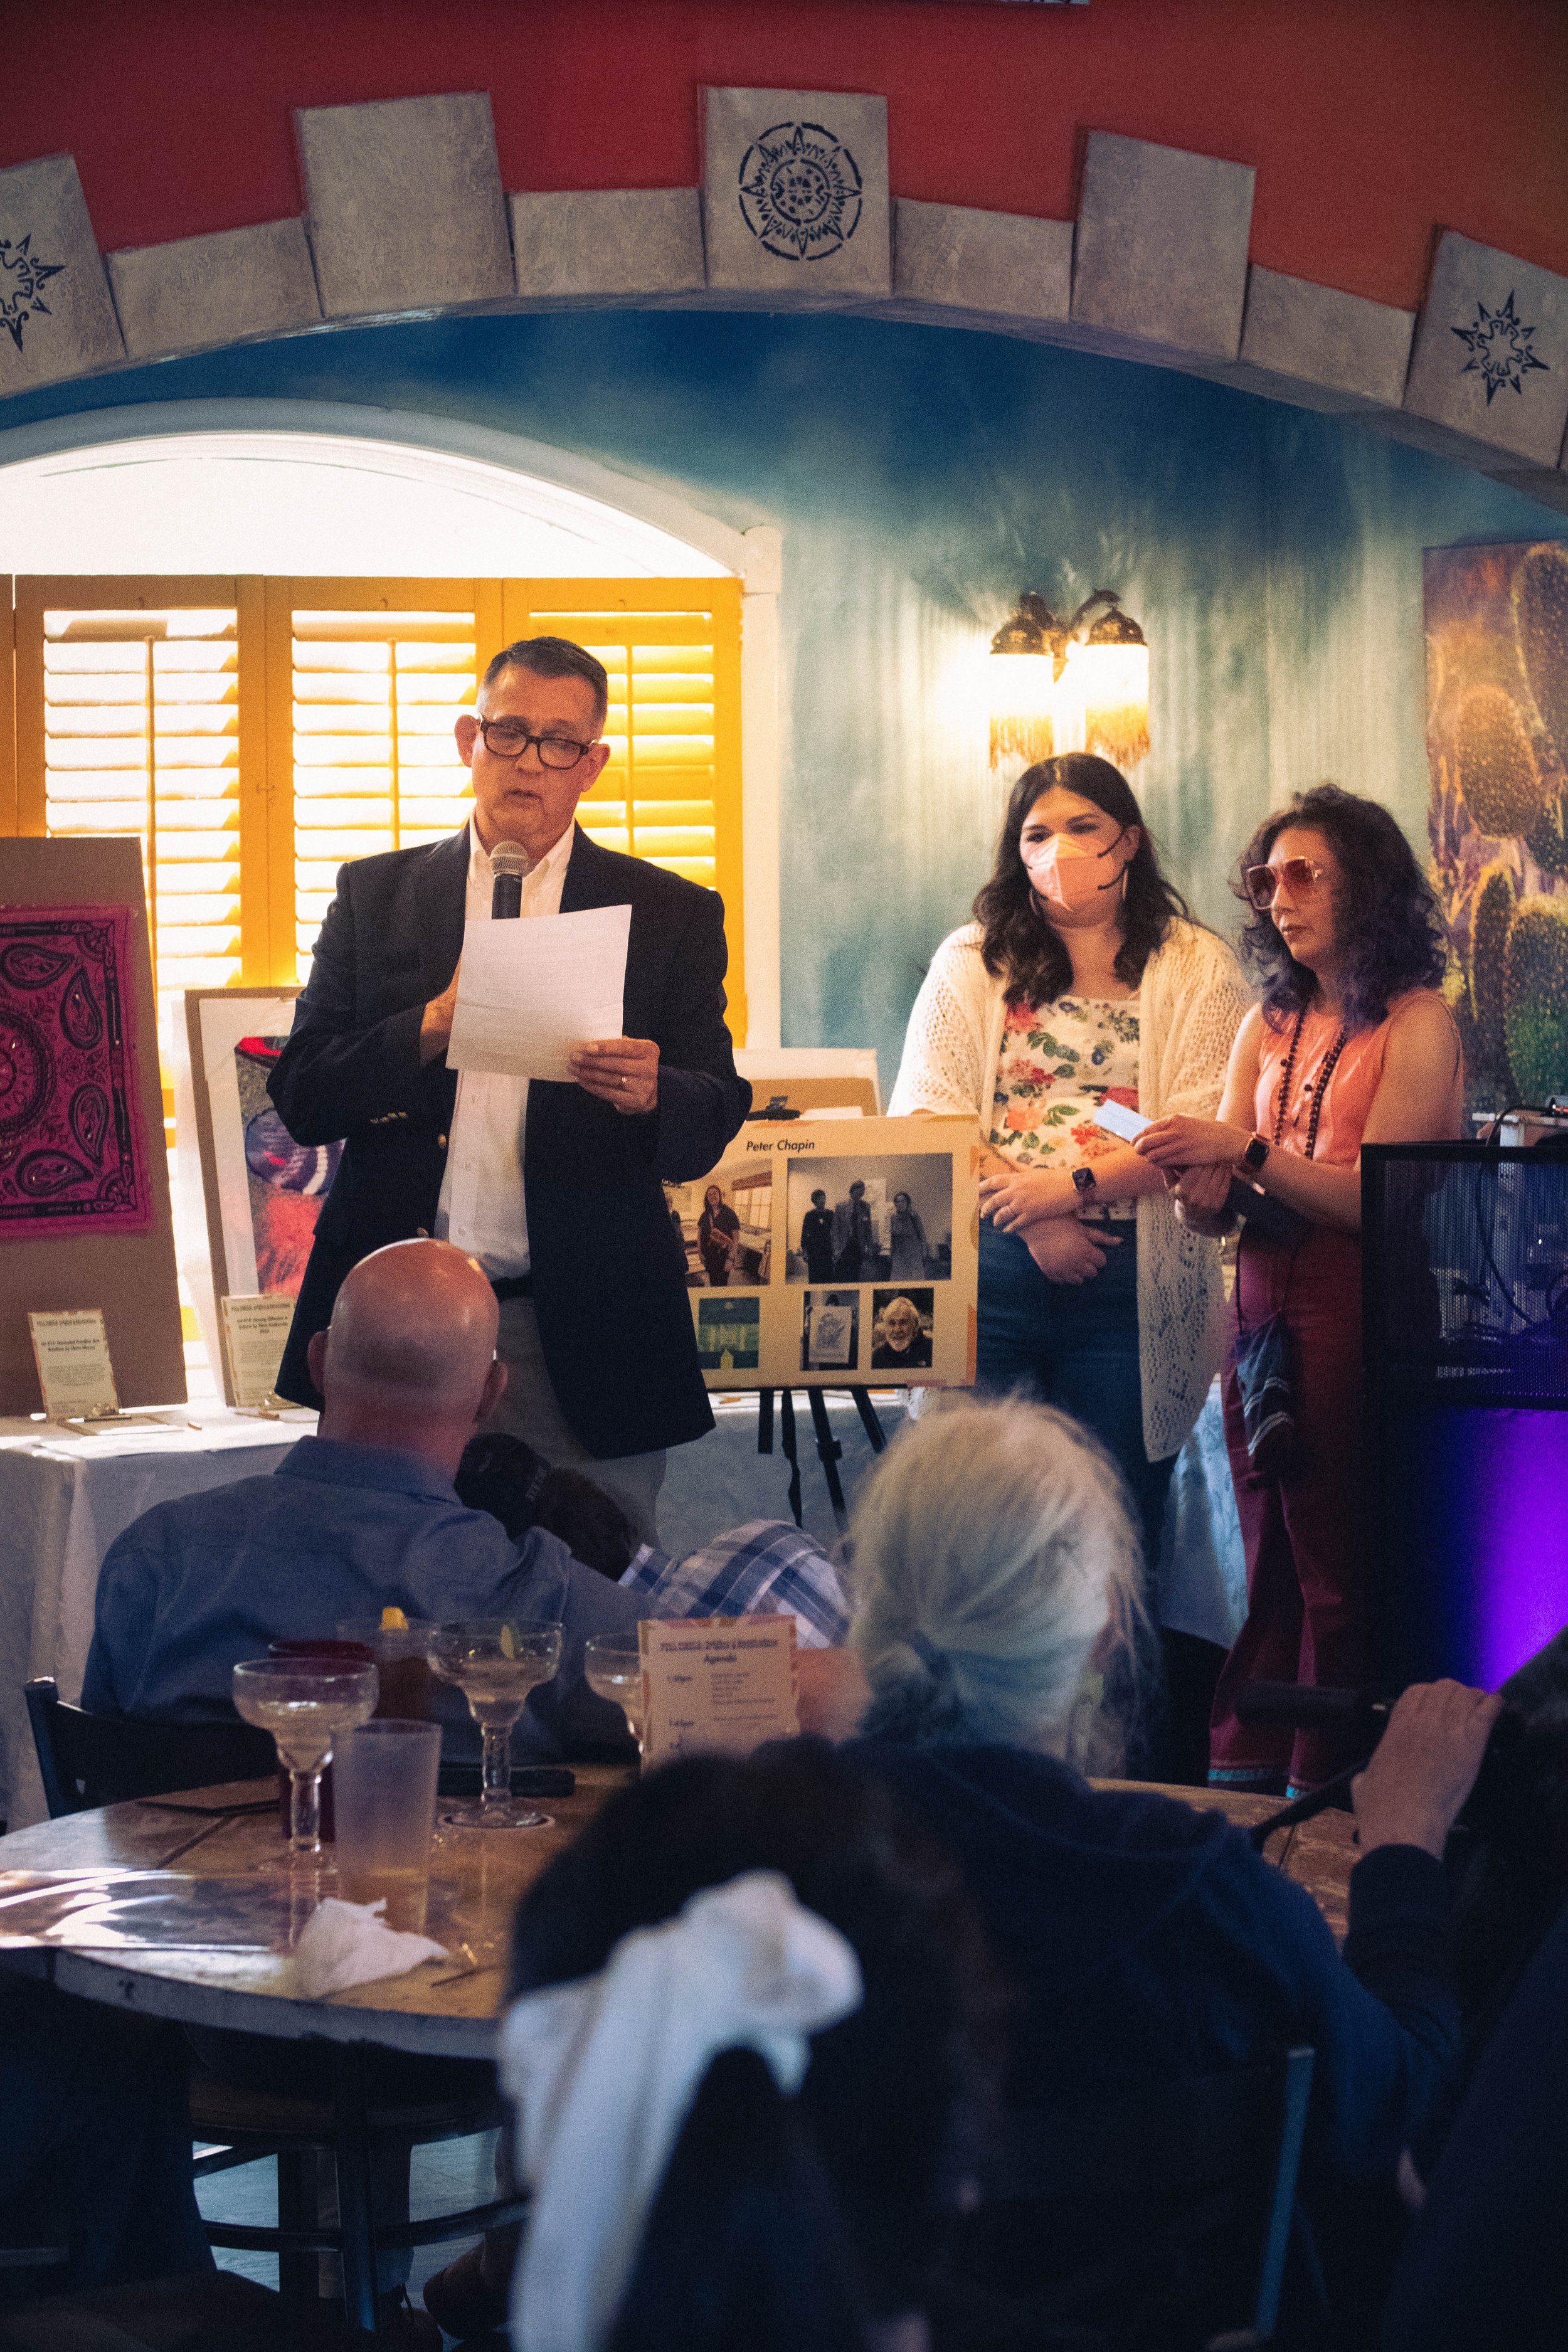  In front of the auction items displayed, Ron Erickson, Rachel Heberling, and Lindsey Knipe are addressing the attendees while standing side-by-side as the window light illuminates the scene. 